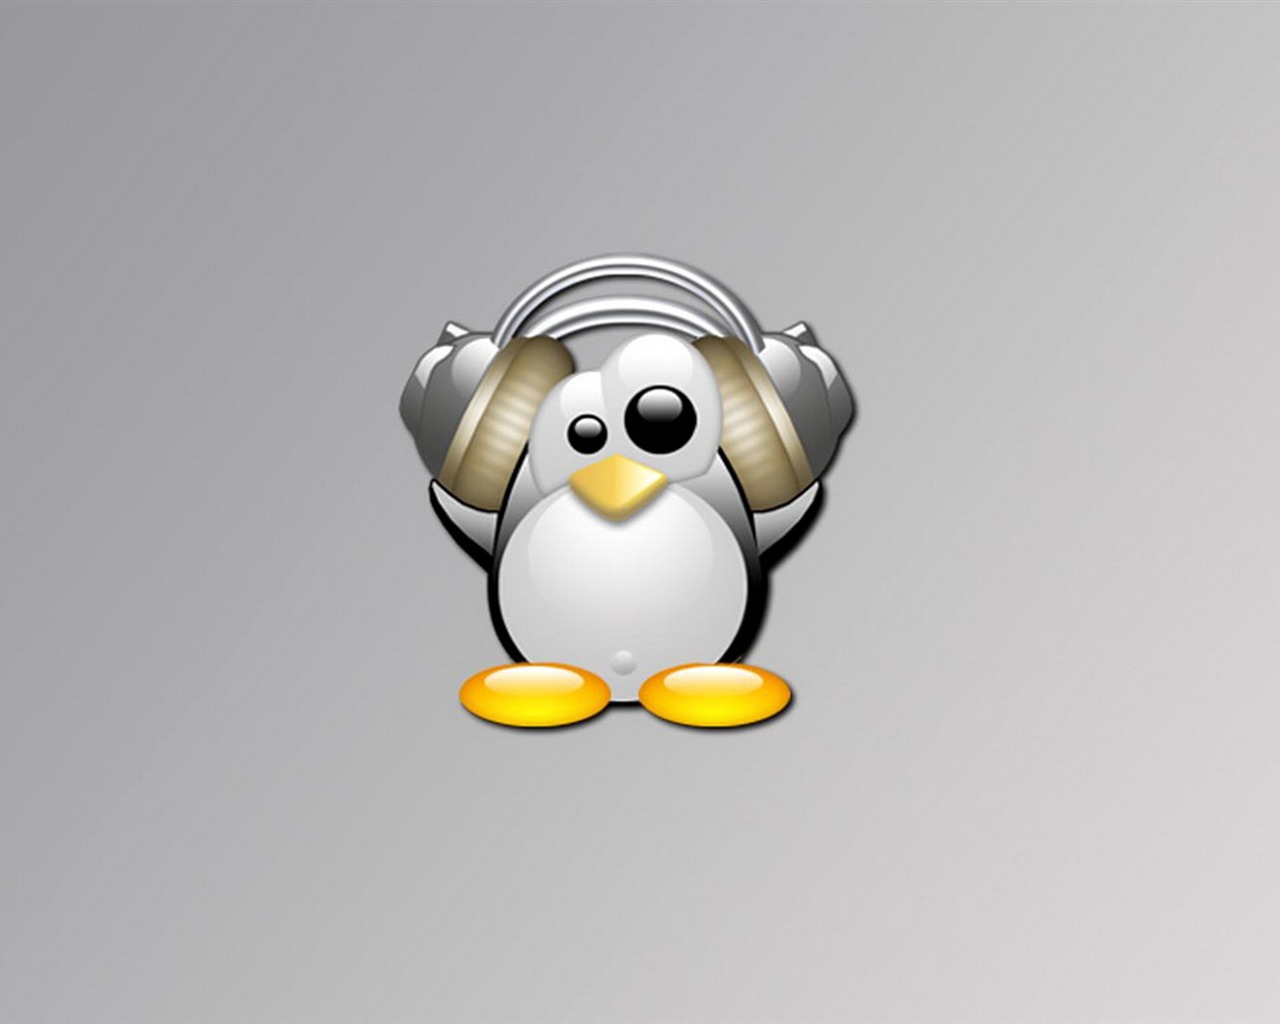 Linux tapety (3) #14 - 1280x1024